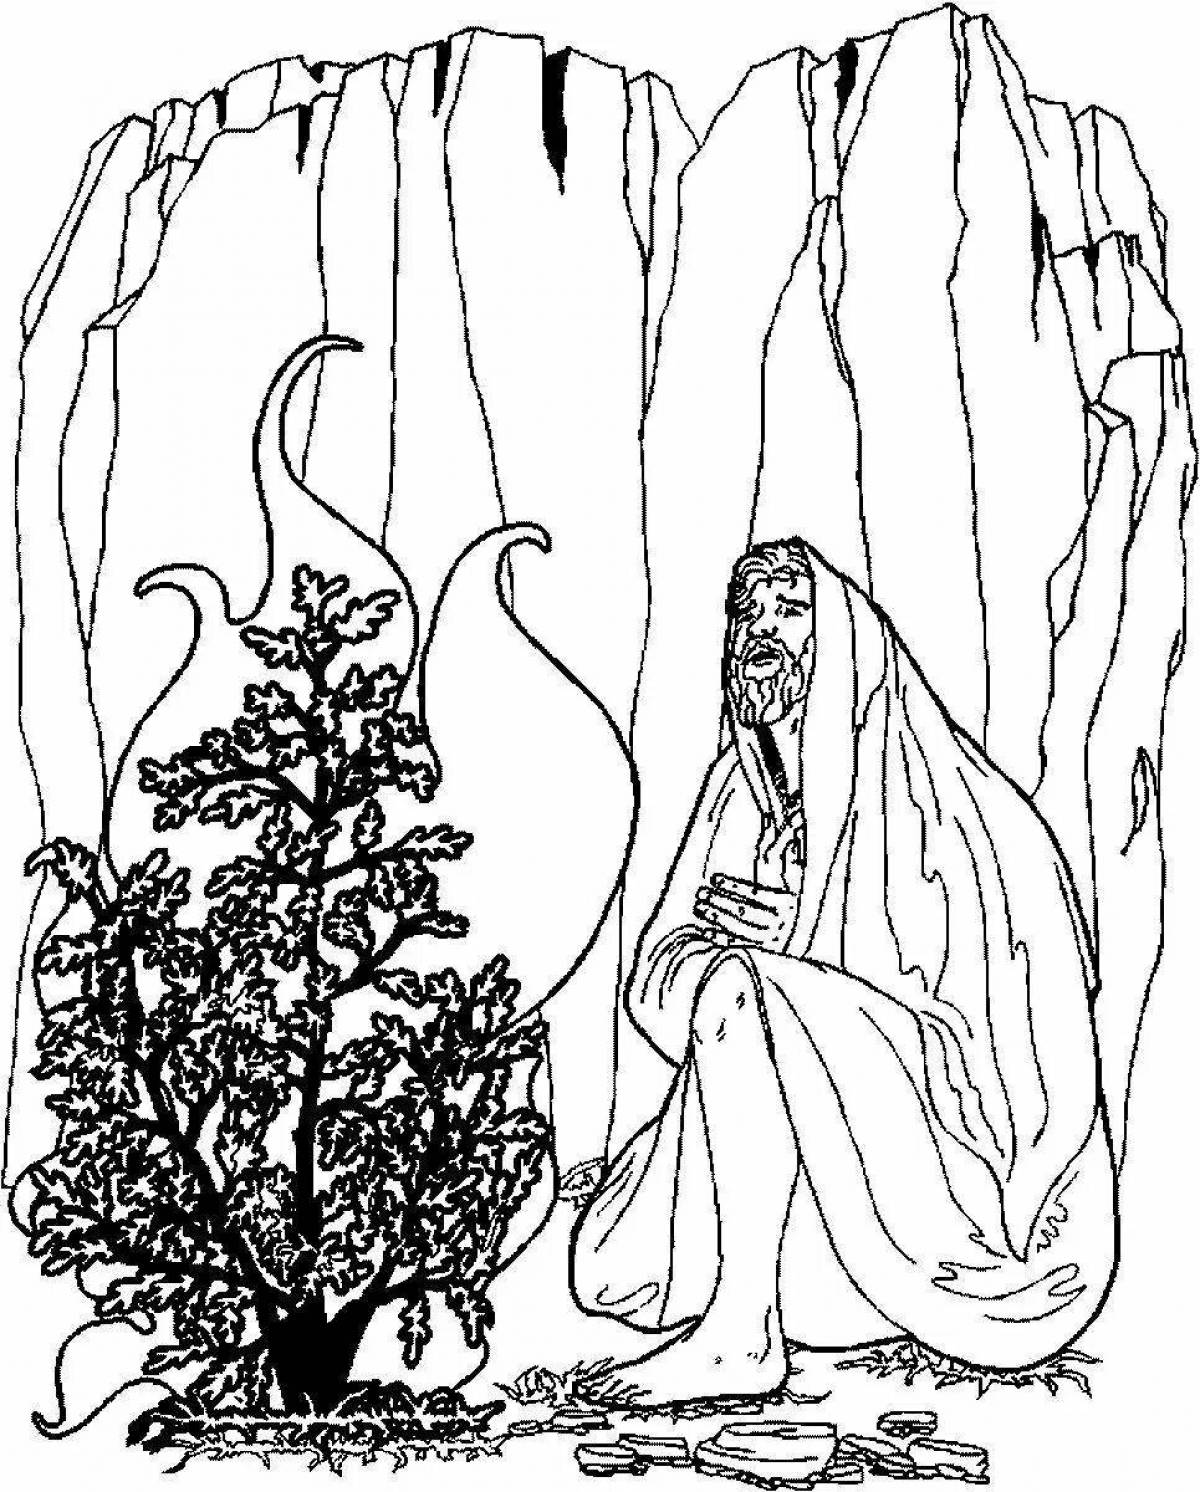 Shining Burning Bush Coloring Page for Toddlers